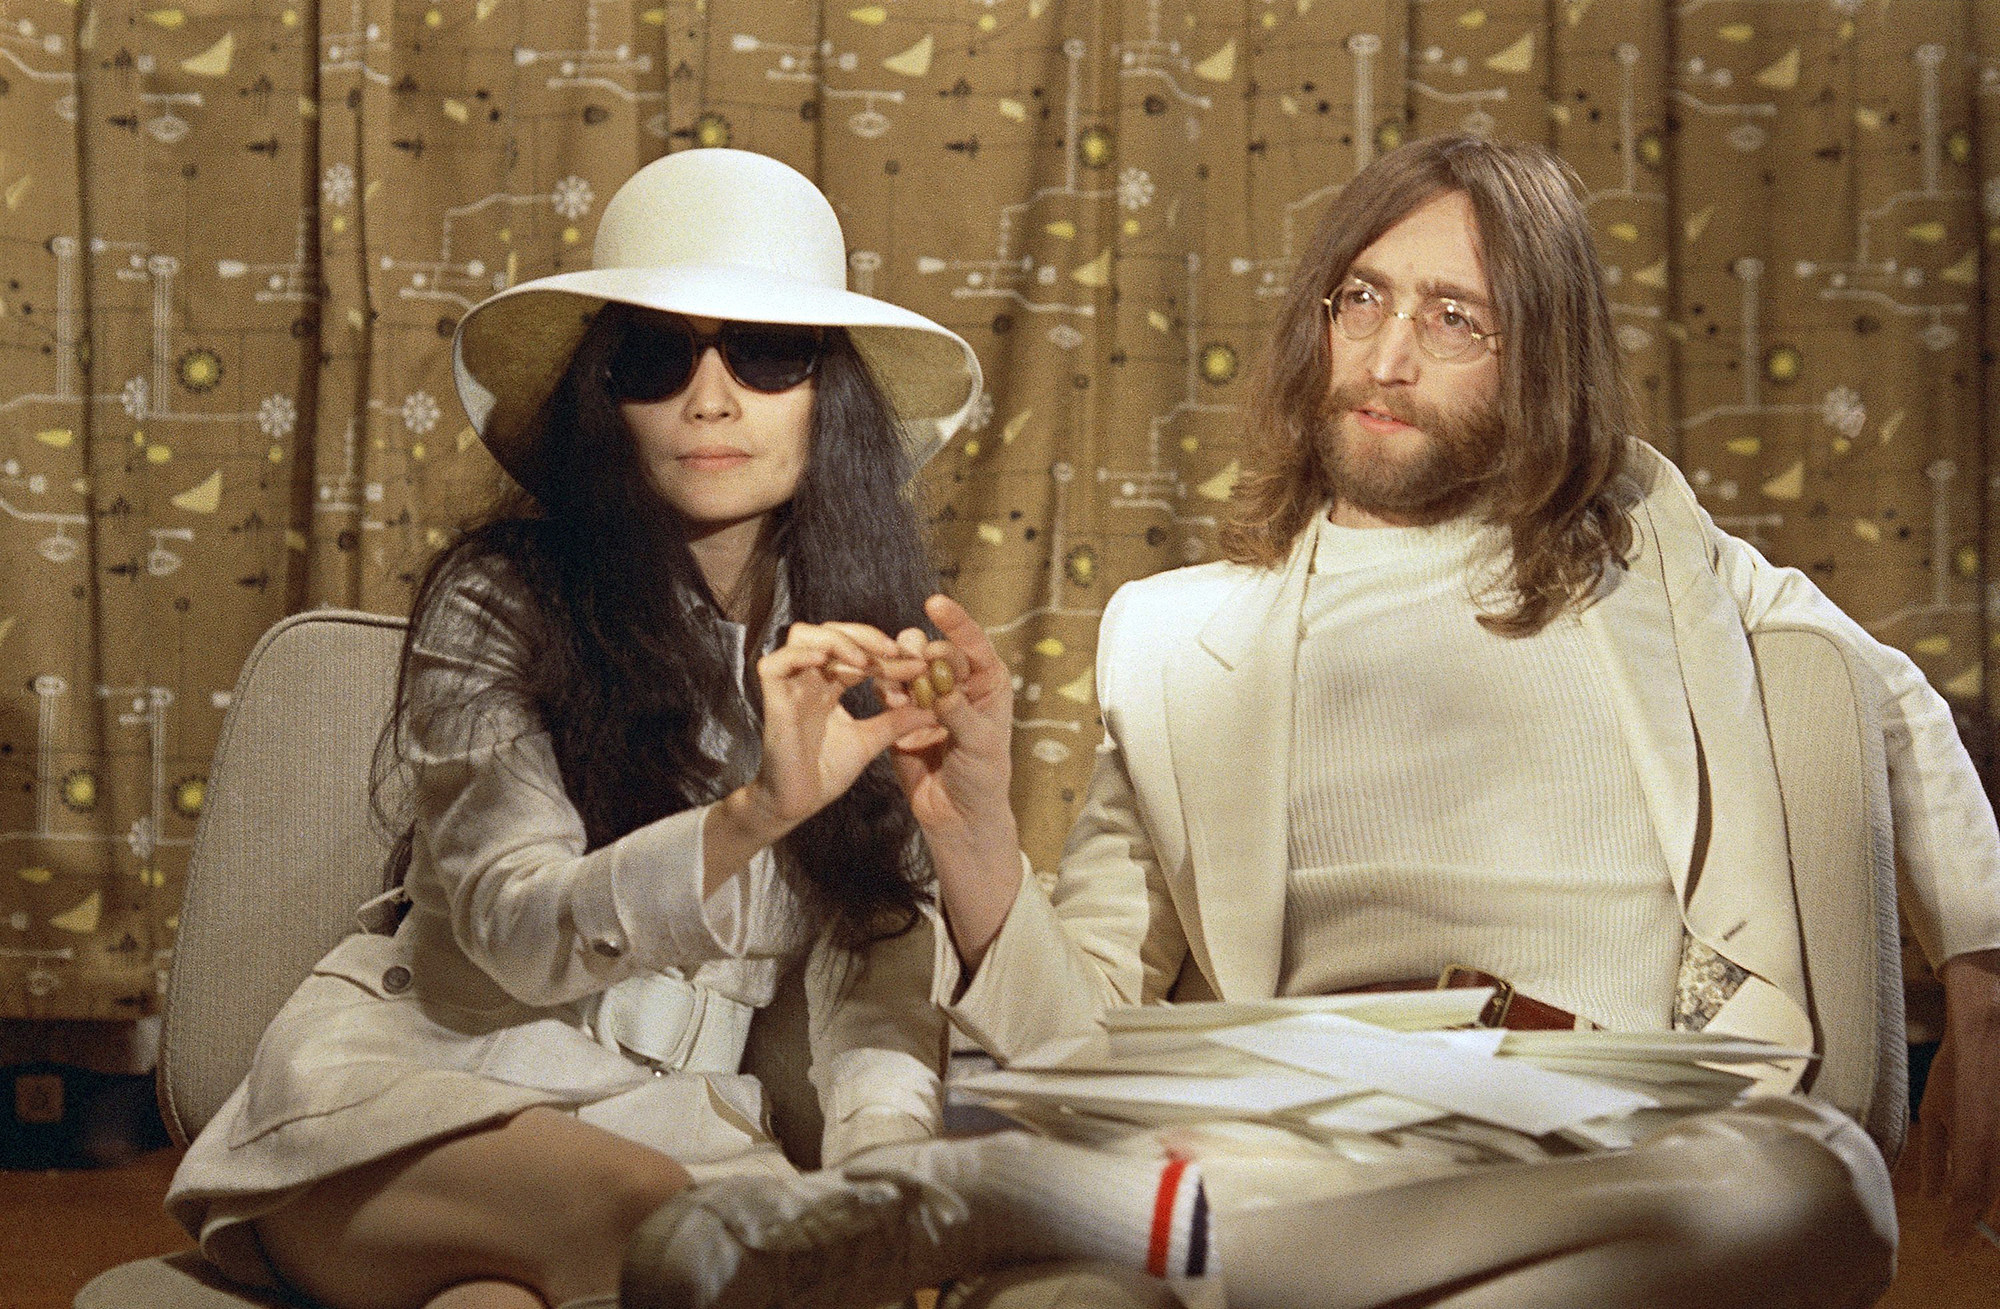 John Lennon and Yoko Ono  in beige sitting giving an interview and holding up olives to the camera